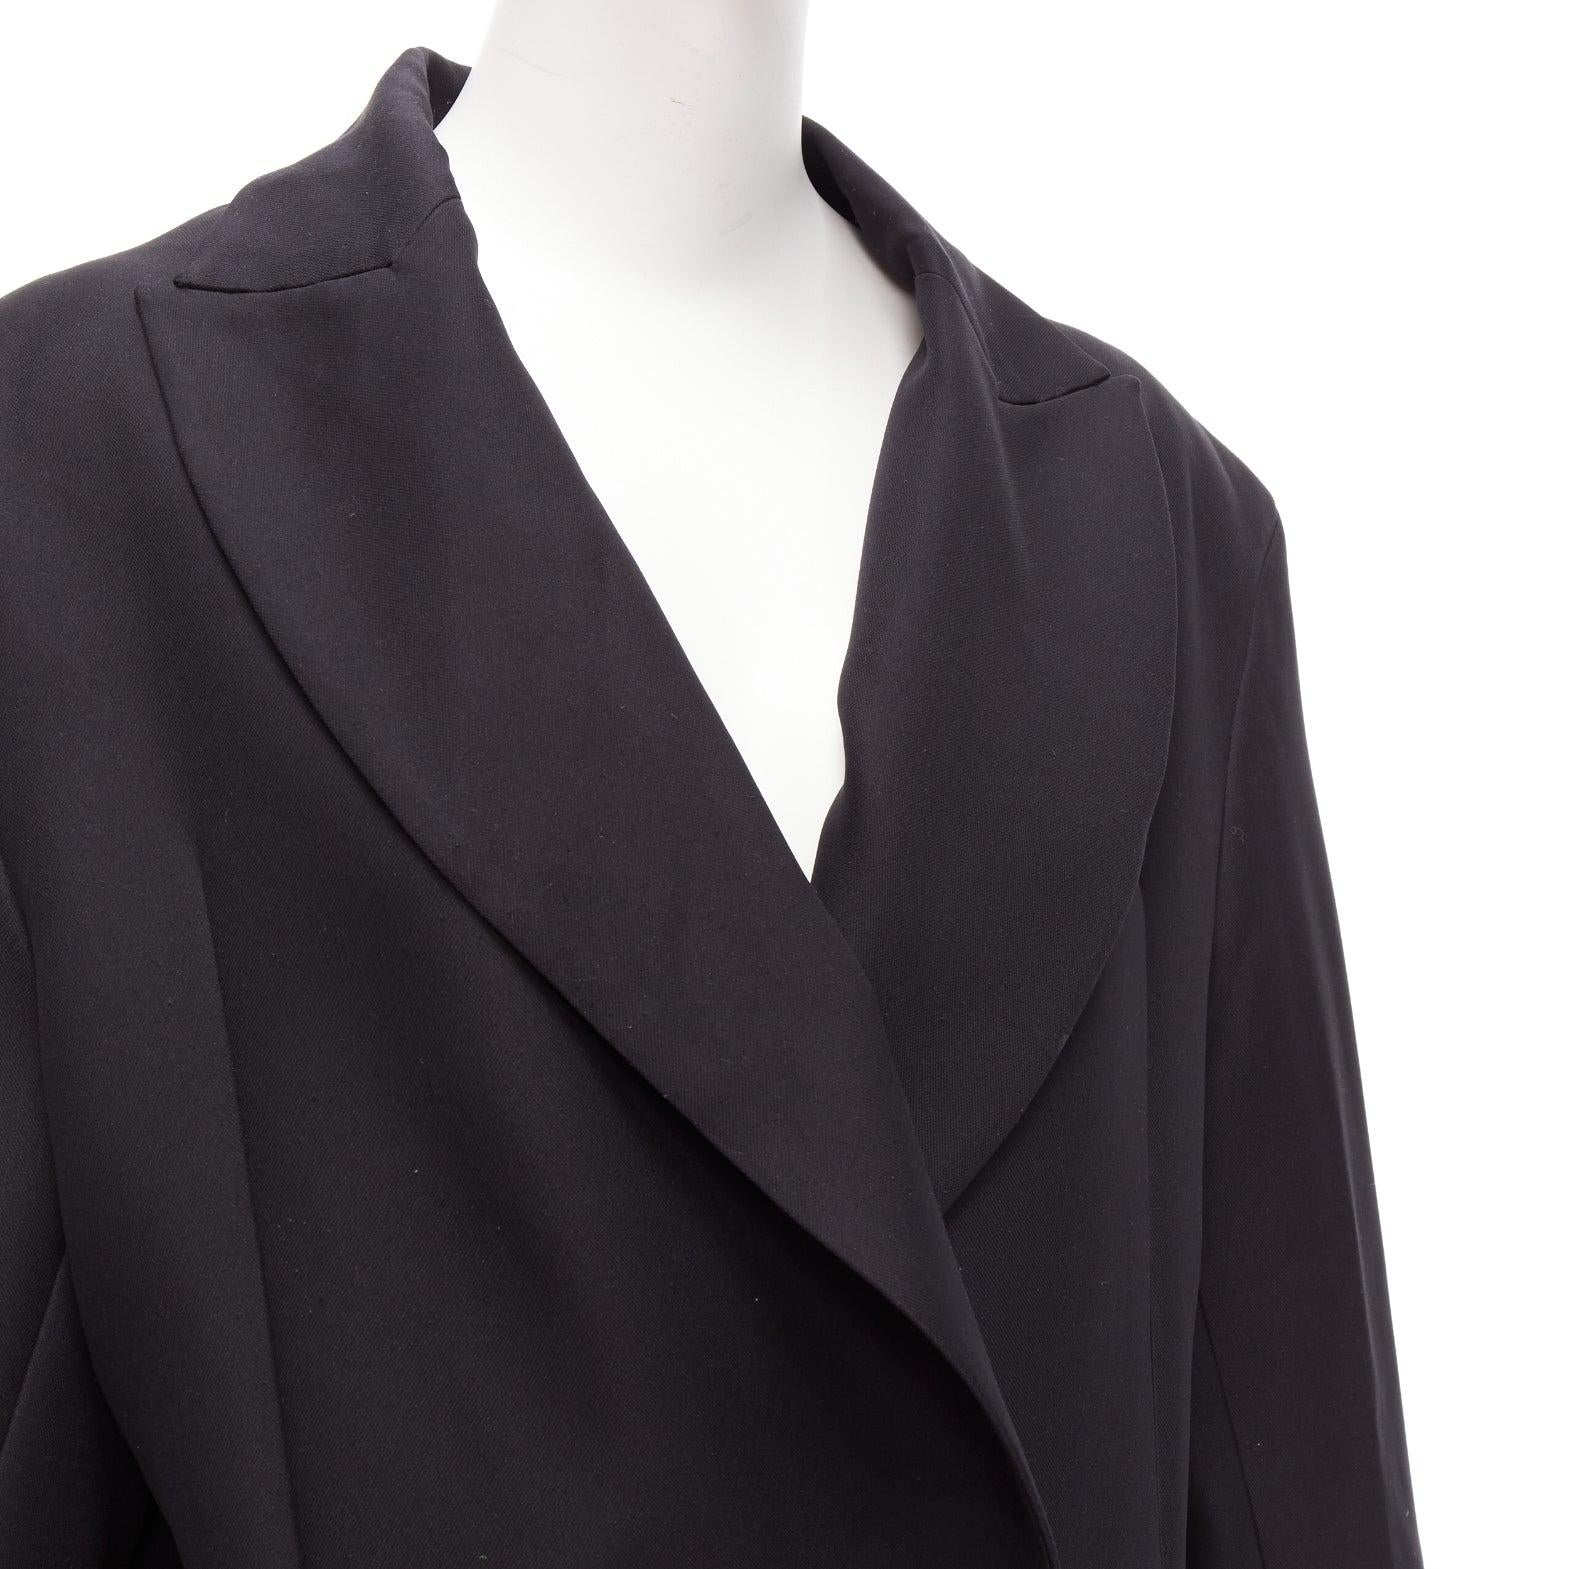 MATICEVSKI 2022 Territories black silk lined buttoned oversized blazer AUS8 S
Reference: KEDG/A00342
Brand: Maticevski
Model: Territories
Collection: FW 2022
Material: Polyester
Color: Black
Pattern: Solid
Closure: Button
Lining: Black Fabric
Extra